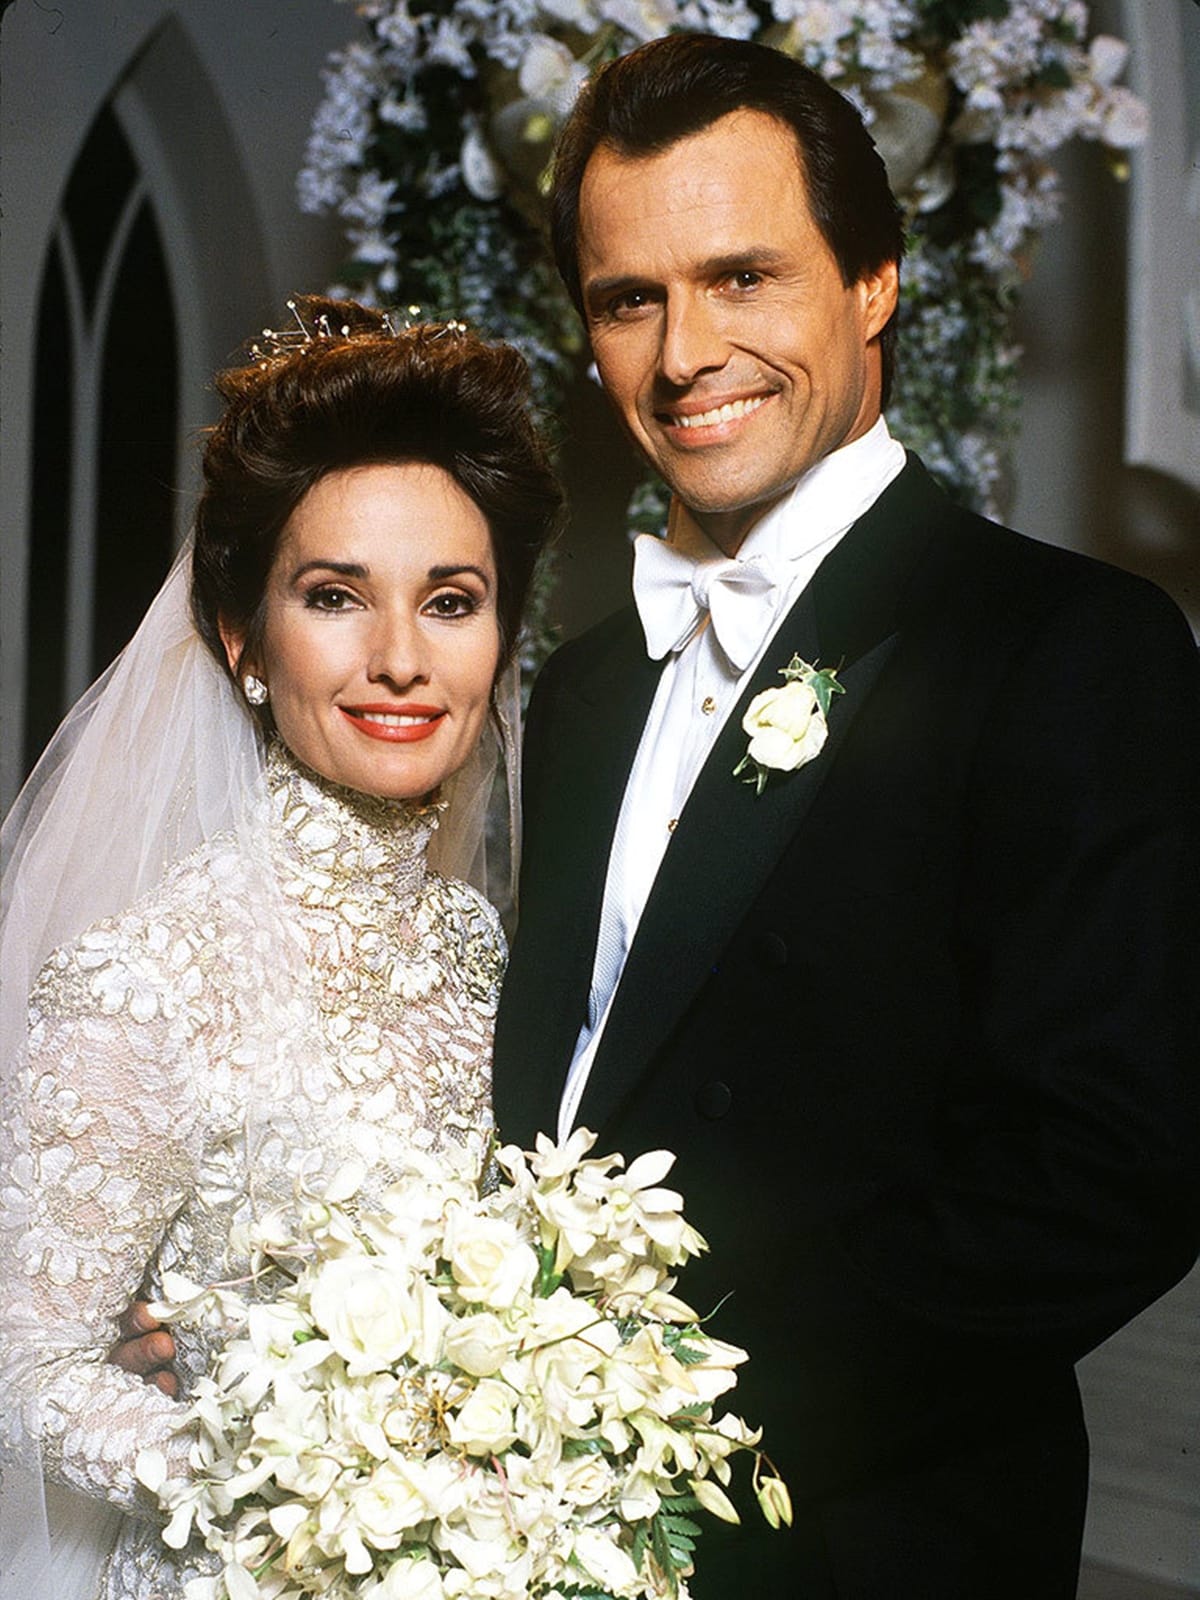 Susan Lucci played Erica Kane on the ABC daytime drama All My Children with Michael Nader as Dimitri Marick